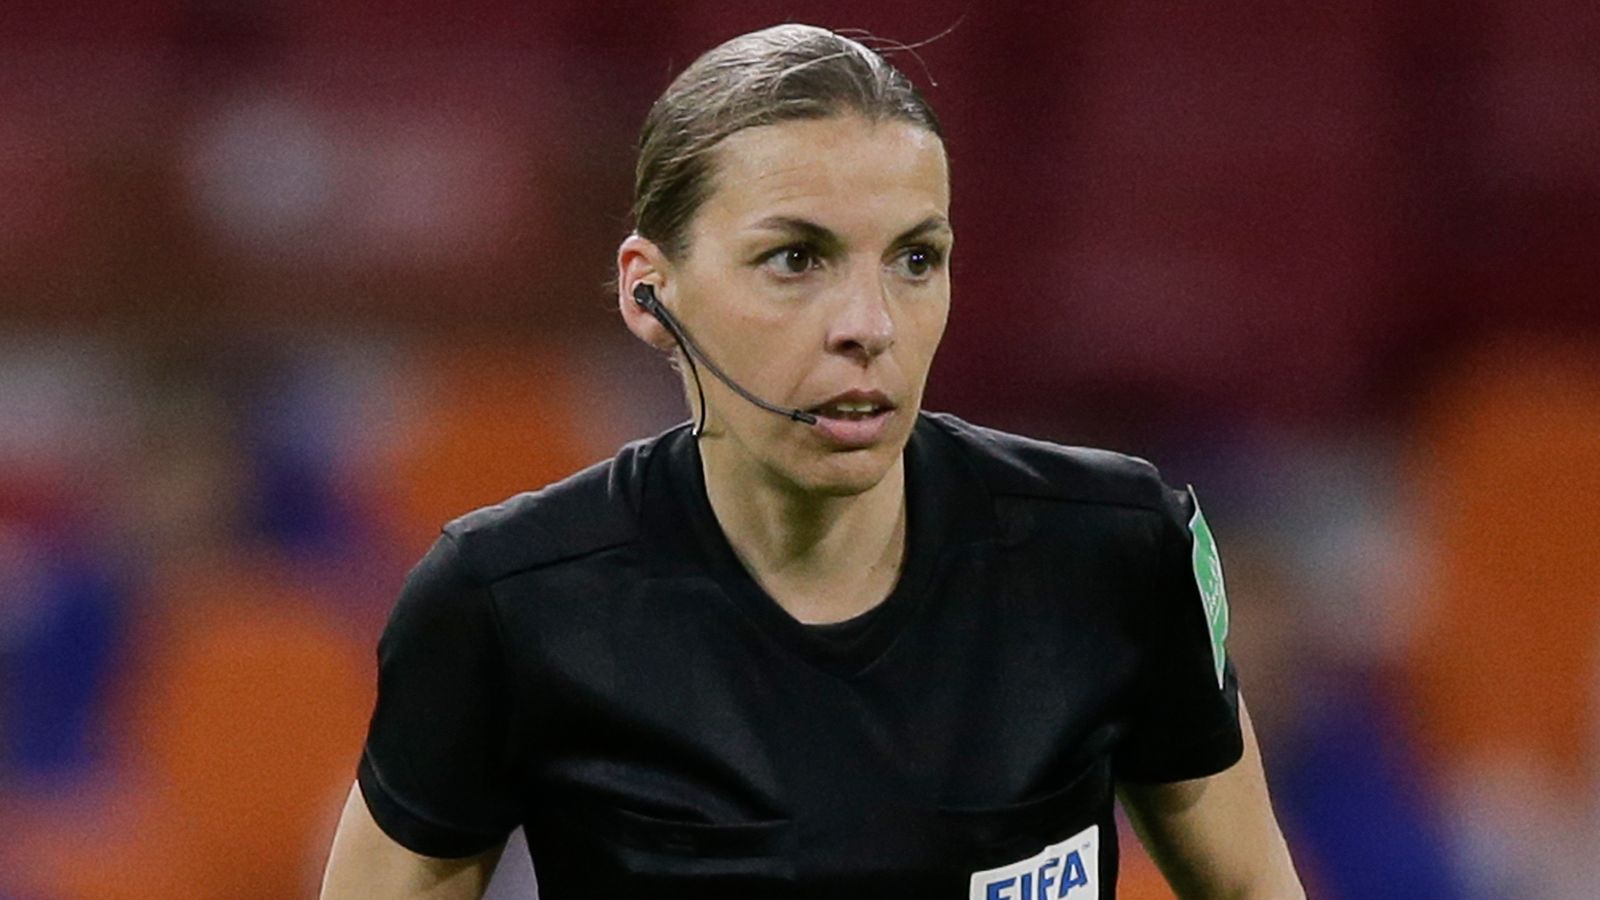 Qatar World Cup to feature three female referees with Premier League's Michael Oliver and Anthony Taylor also selected to officiate